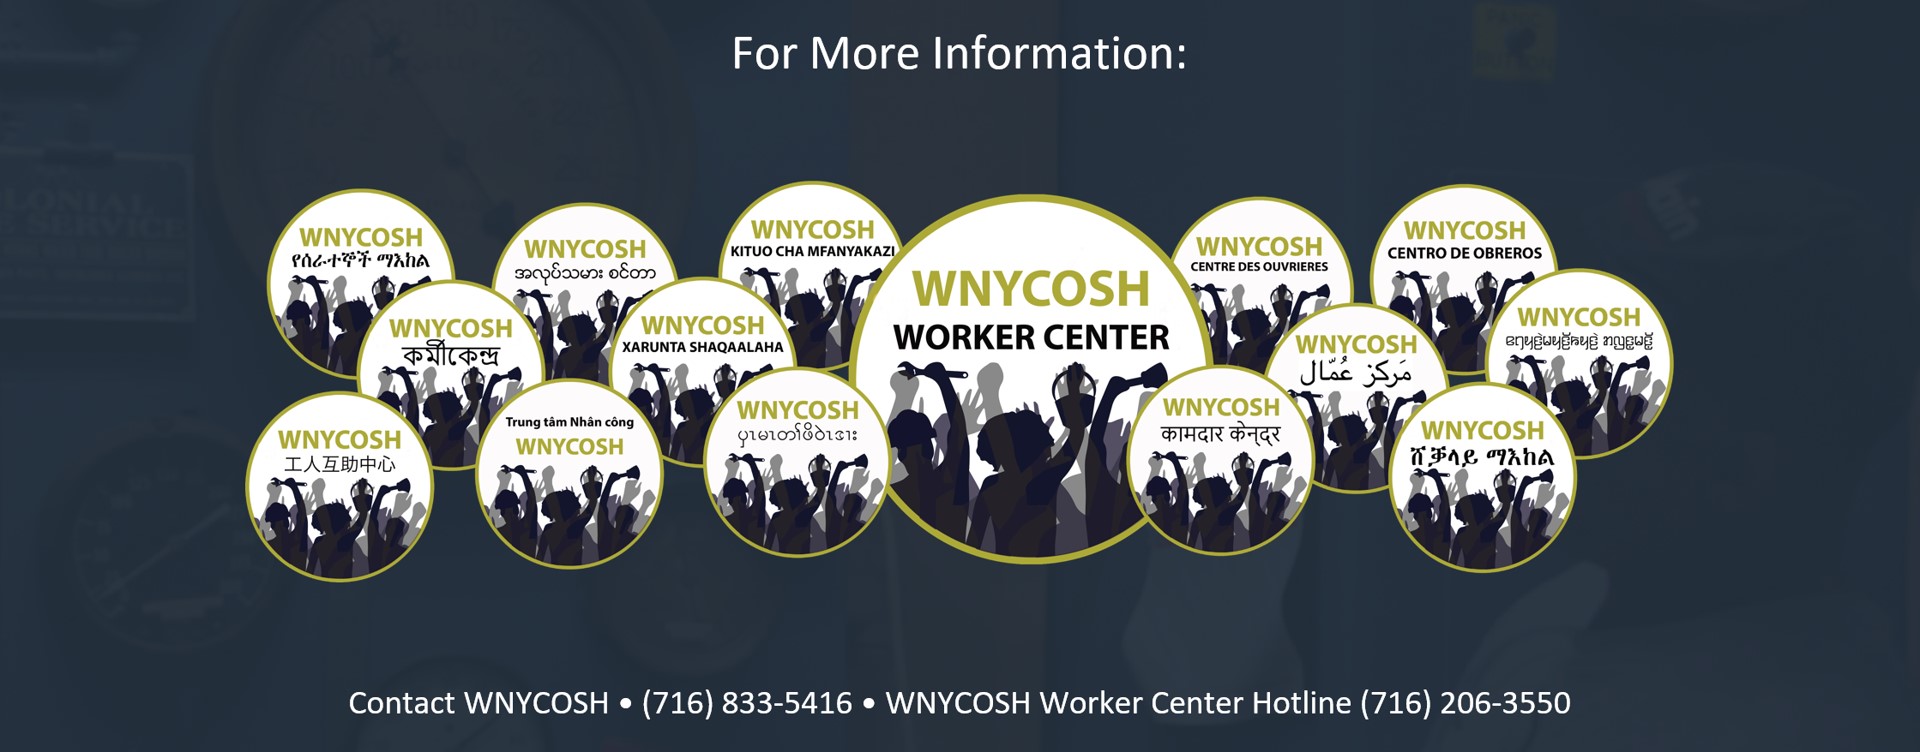 Header says for more information in white over a mashup of WNYCOSH Worker Center logos in 10 different languages. At the bottom it says: Contact WNYCOSH • (716) 833-5416 • WNYCOSH Worker Center Hotline (716) 206-3550